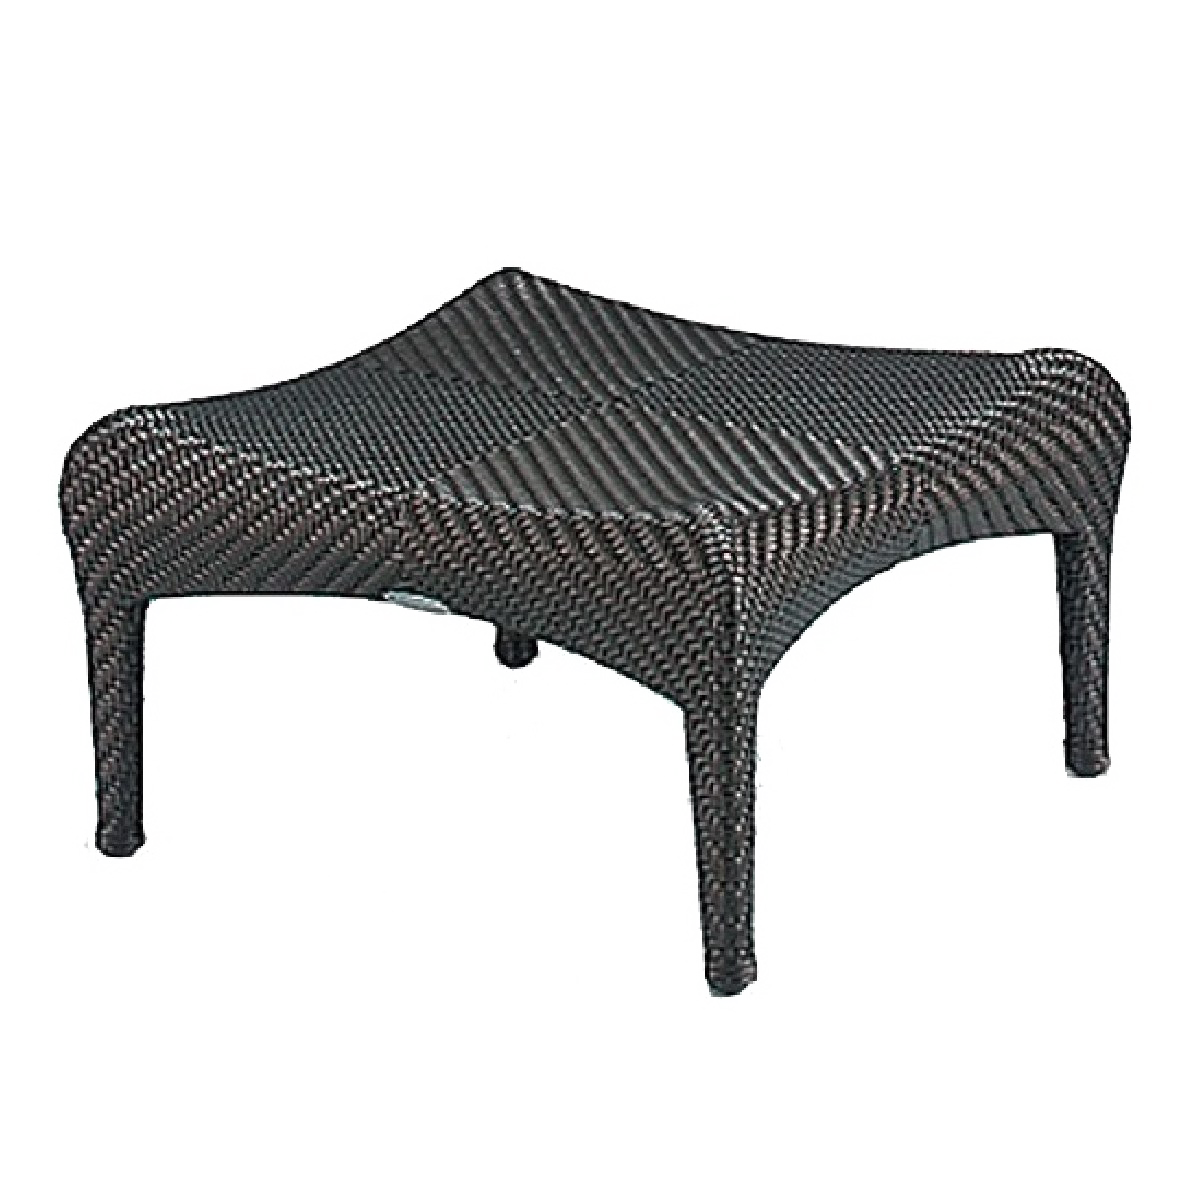 Footstool Image Free Clipart HD PNG Image